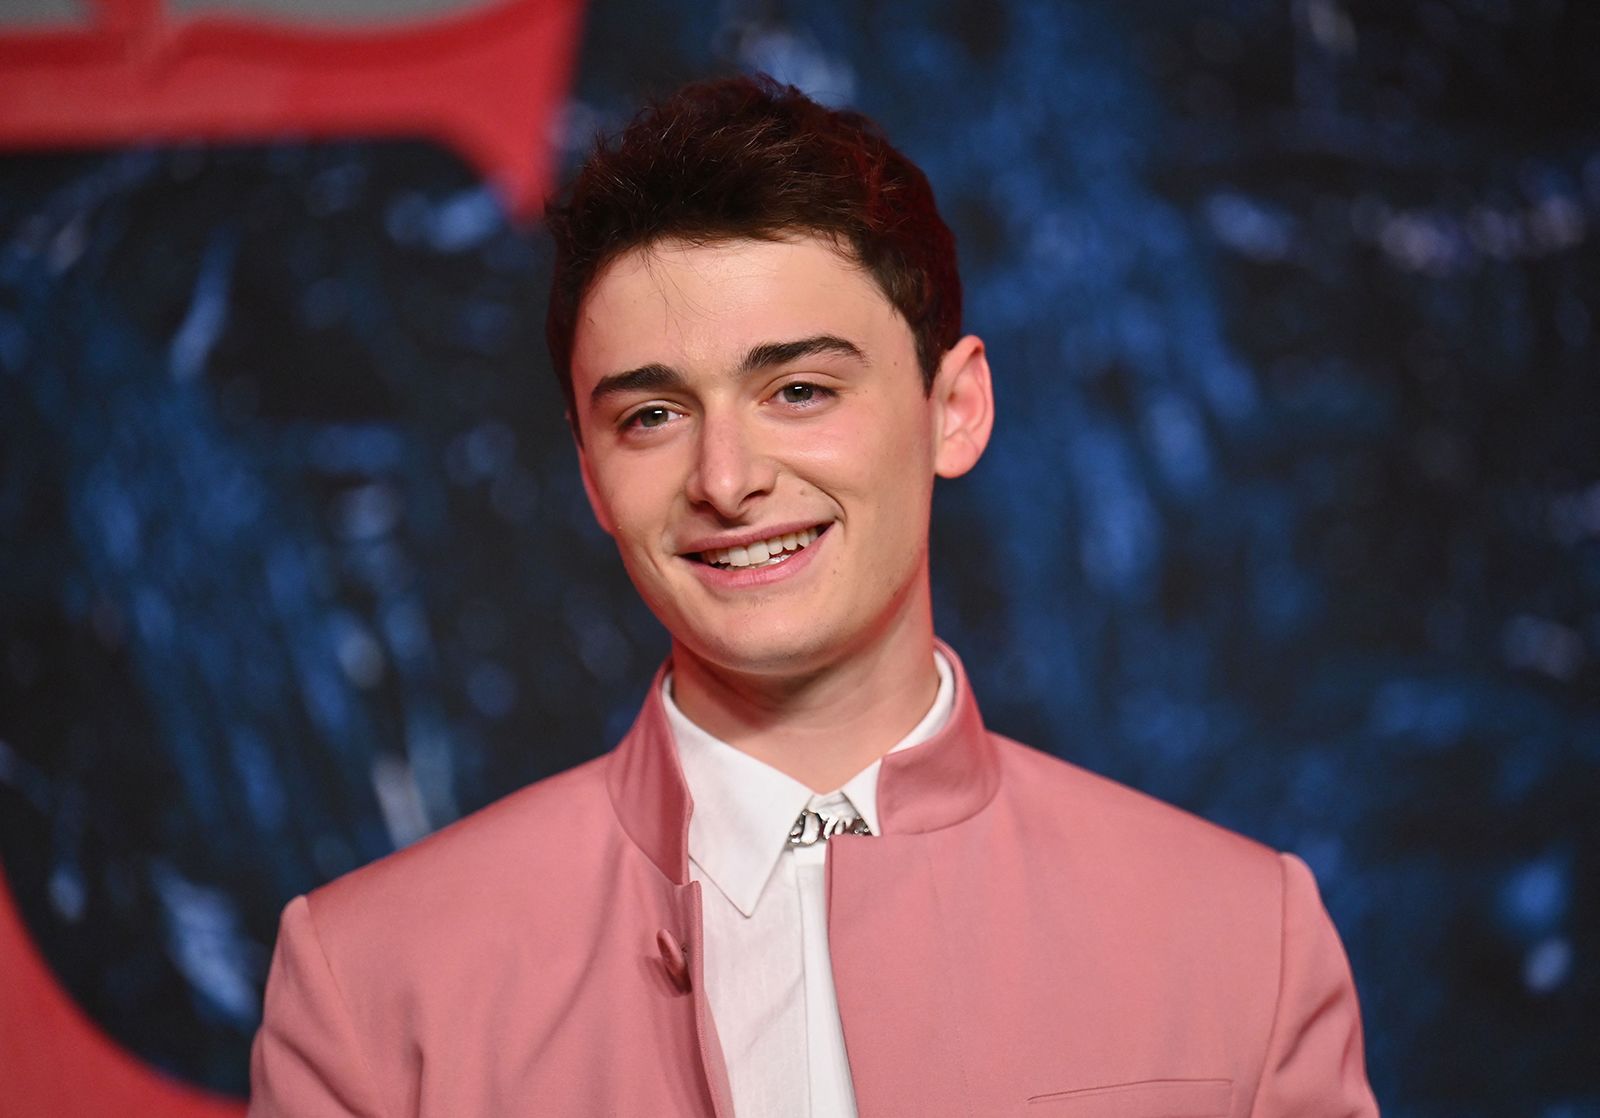 Stranger Things Star Noah Schnapp: 100% Clear Will's Gay, Loves Mike